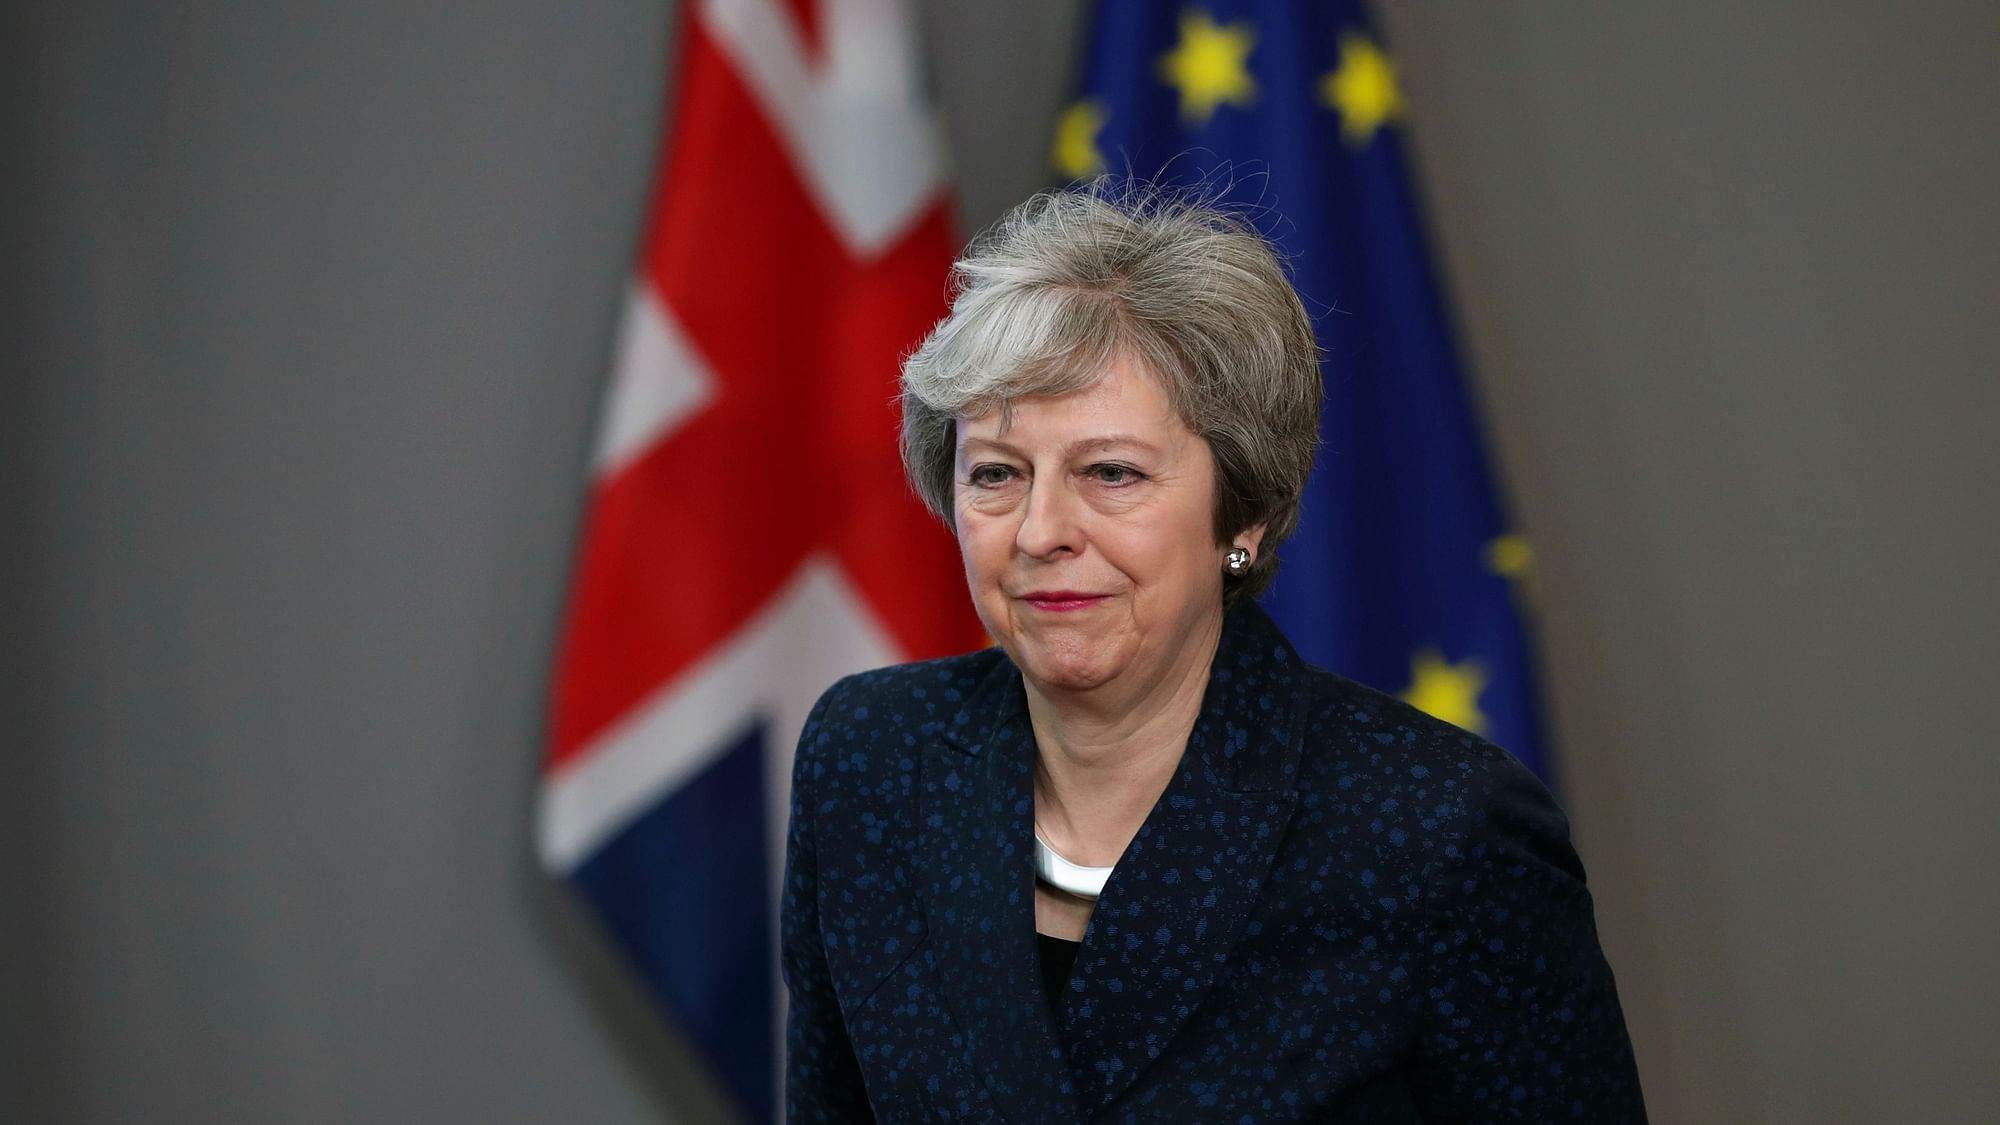 Britain’s Prime Minister Theresa May leaves after her meeting with European Council President Donald Tusk at the European Council headquarters in Brussels.